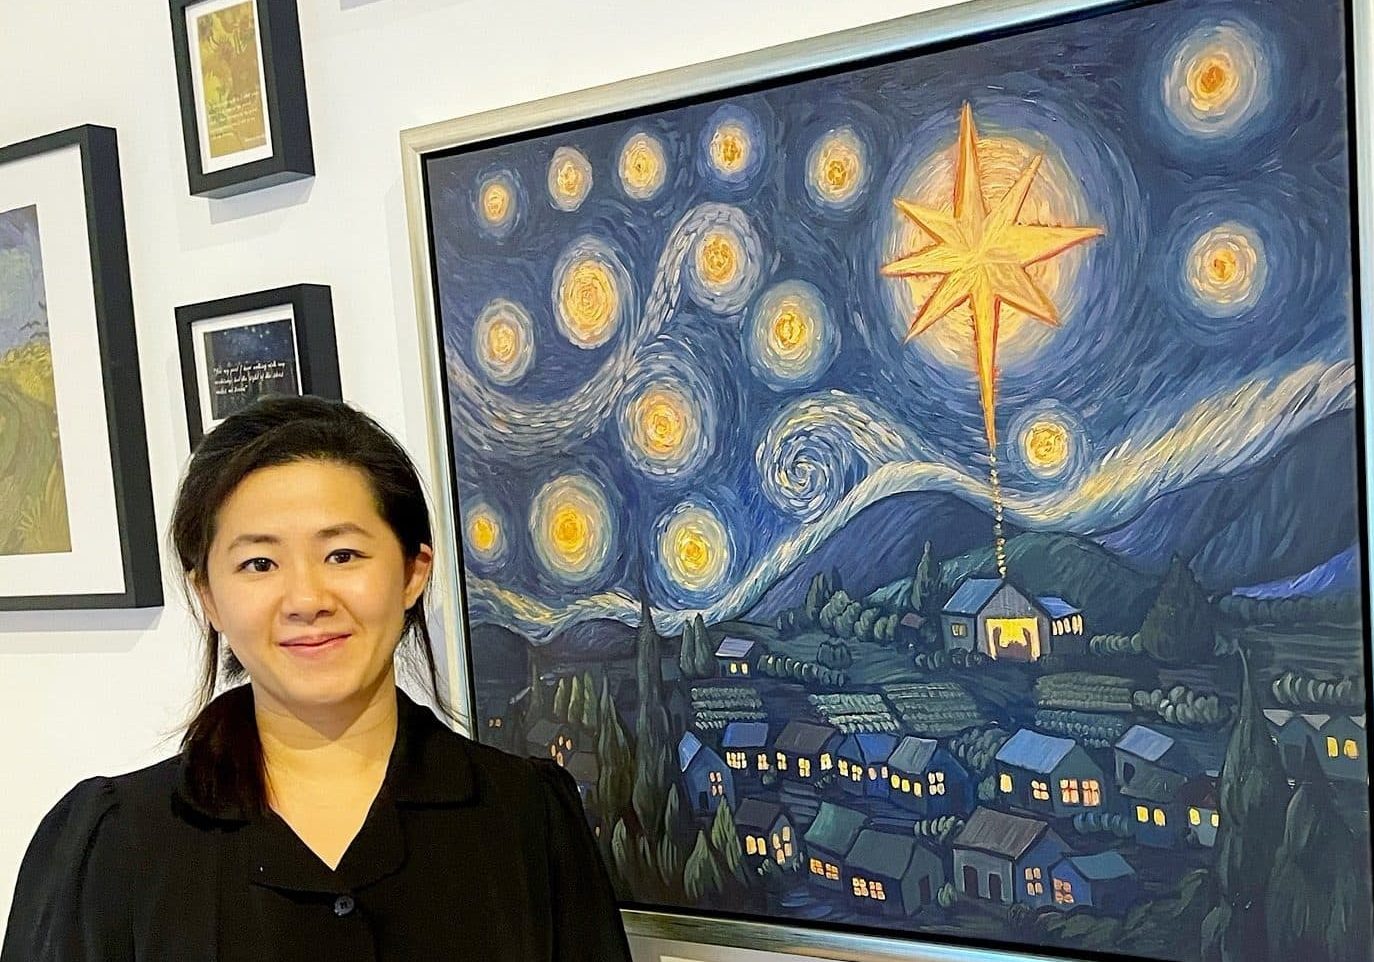 Once tormented by a demonic spirit, she now brings hope to others through her paintings